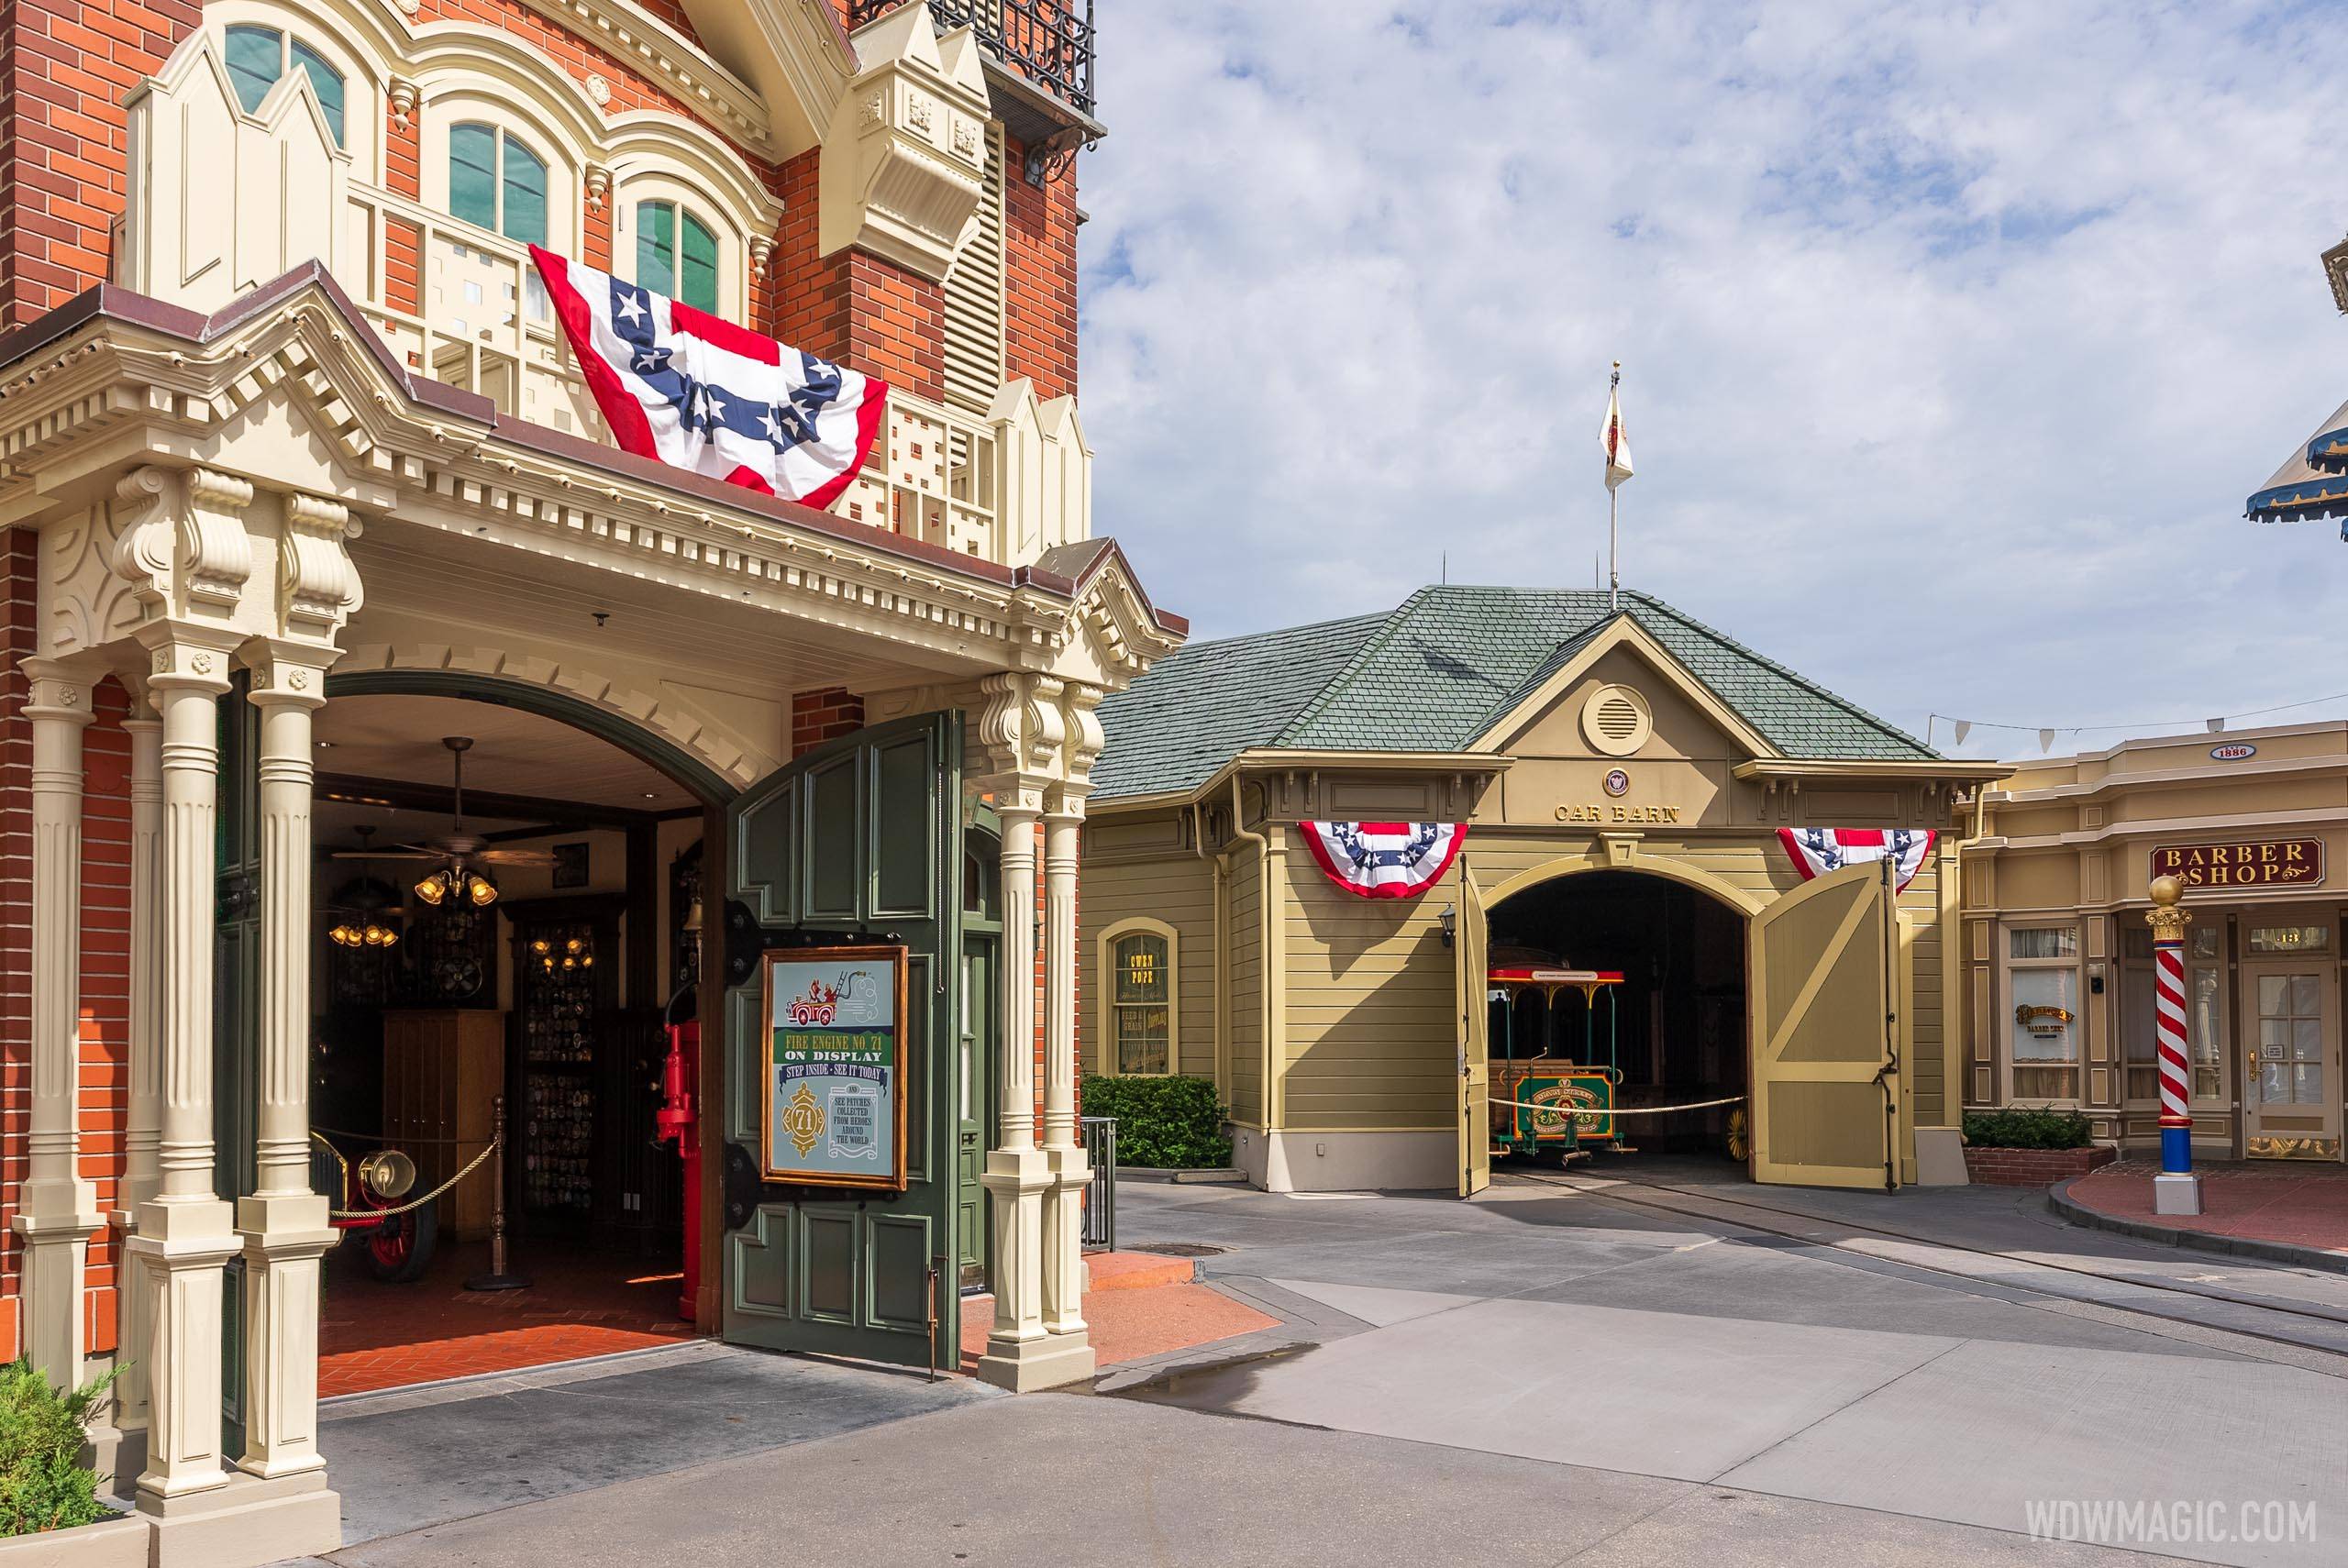 The Magic Kingdom Fire Station and Car Barn decorated for July Fourth